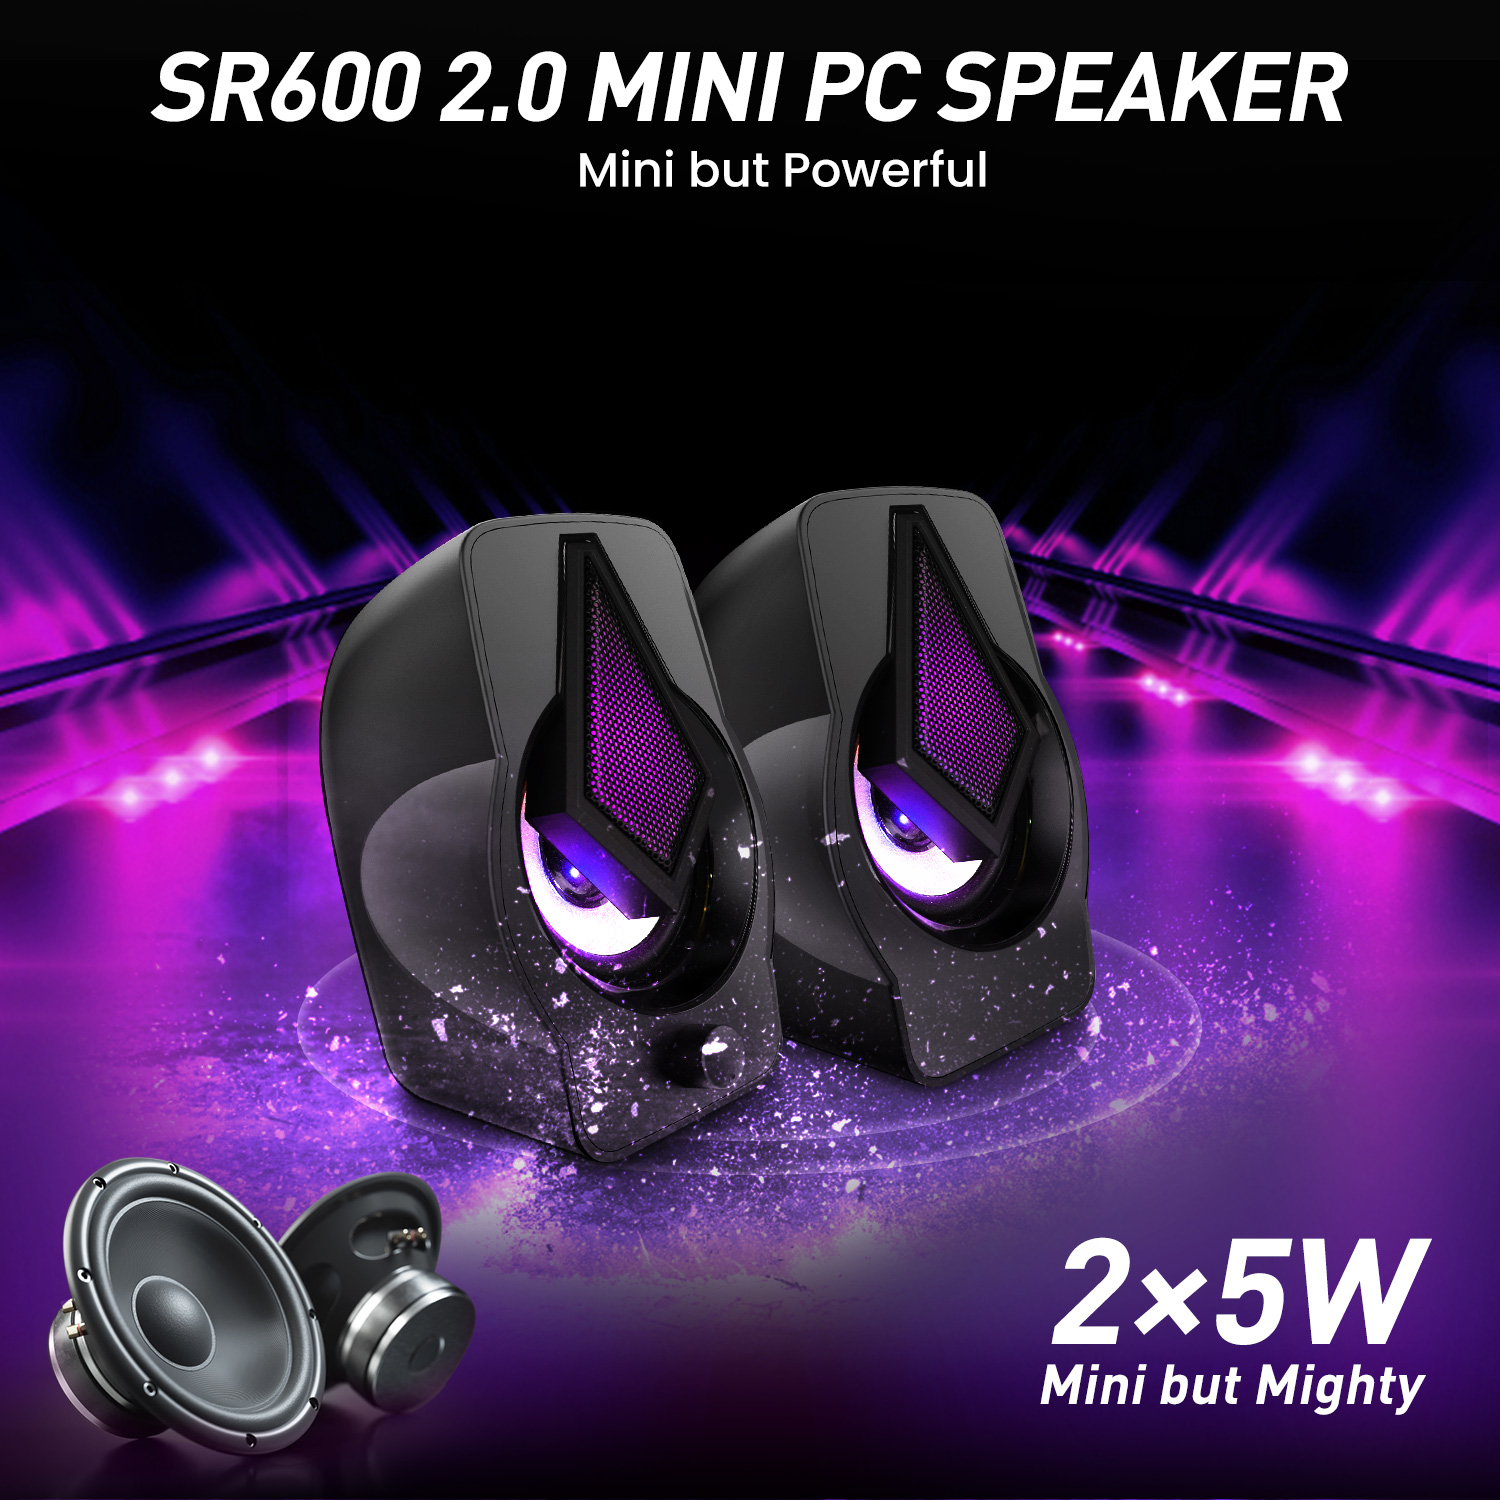 Computer Gaming Speakers, ELEGIANT 10W LED PC Speakers with RGB Multi-Light Rhythm Modes, Easy-Access Volume Control, 2.0 Stereo USB Speakers for PC/Laptops/Desktops/Phone/Ipad - image 1 of 7